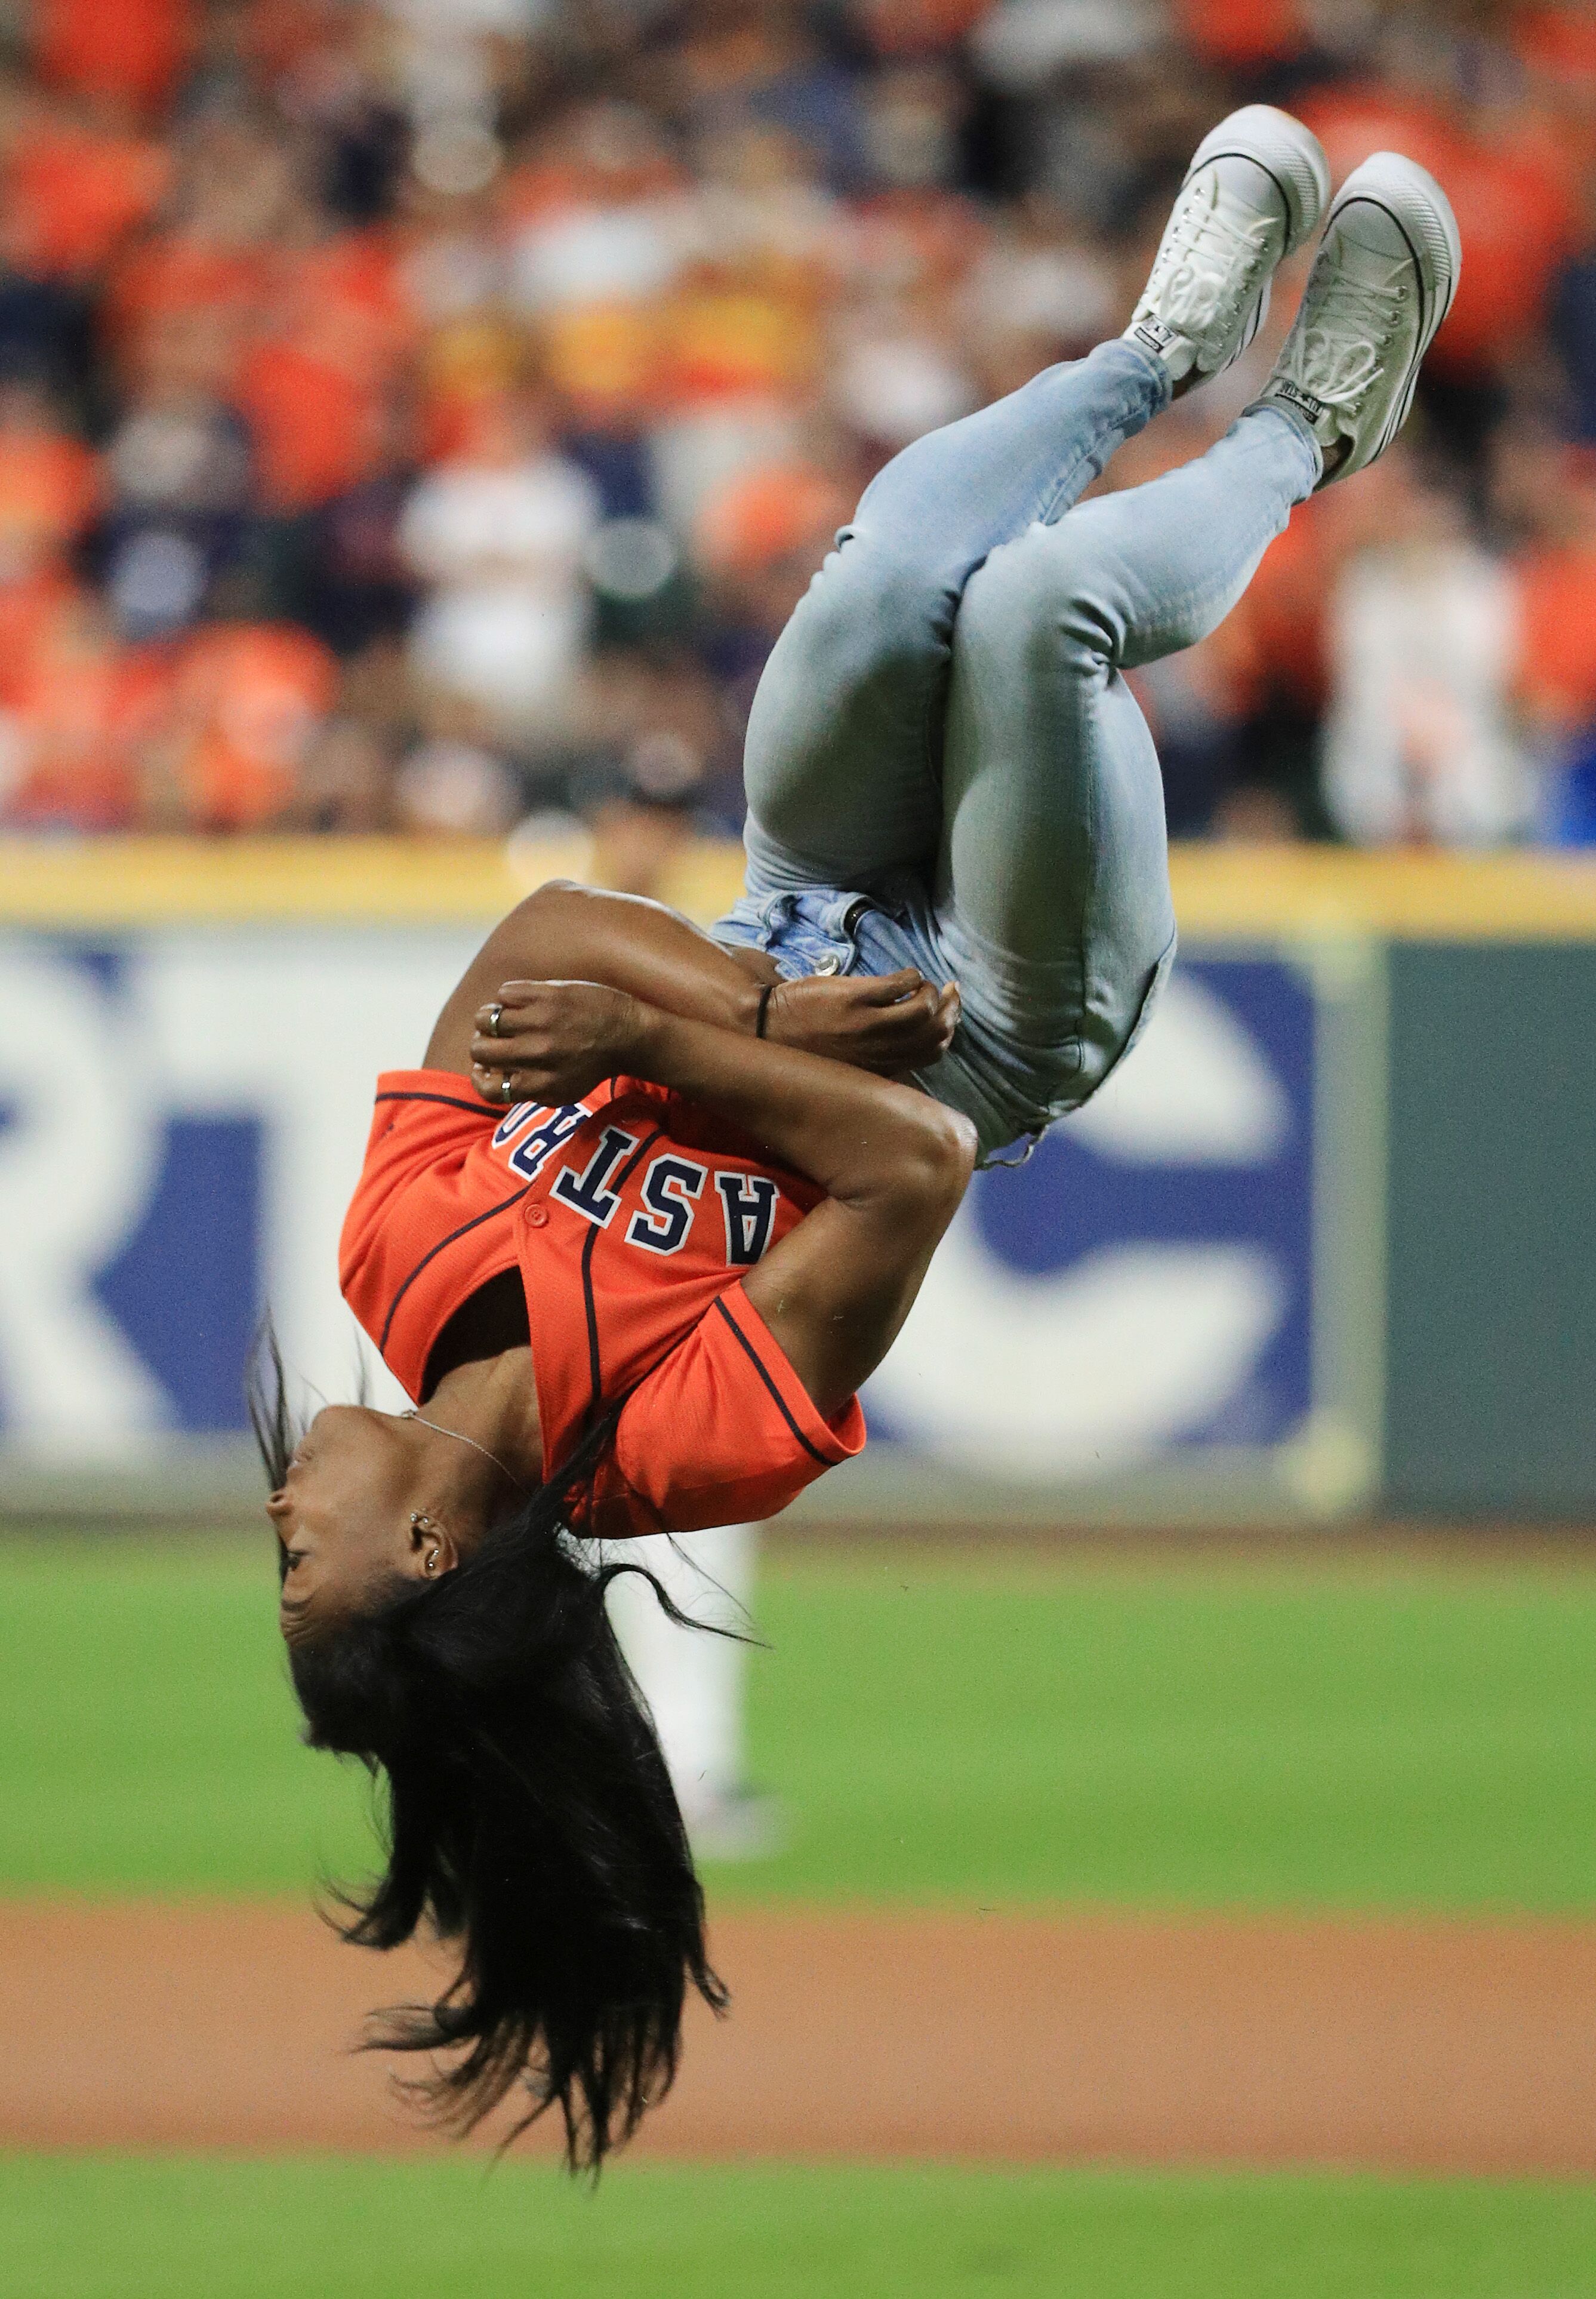 Simone Biles at a World Series game between the Houston Astros and the Washington Nationals on Oct. 23, 2019 in Texas | Source: Getty Images